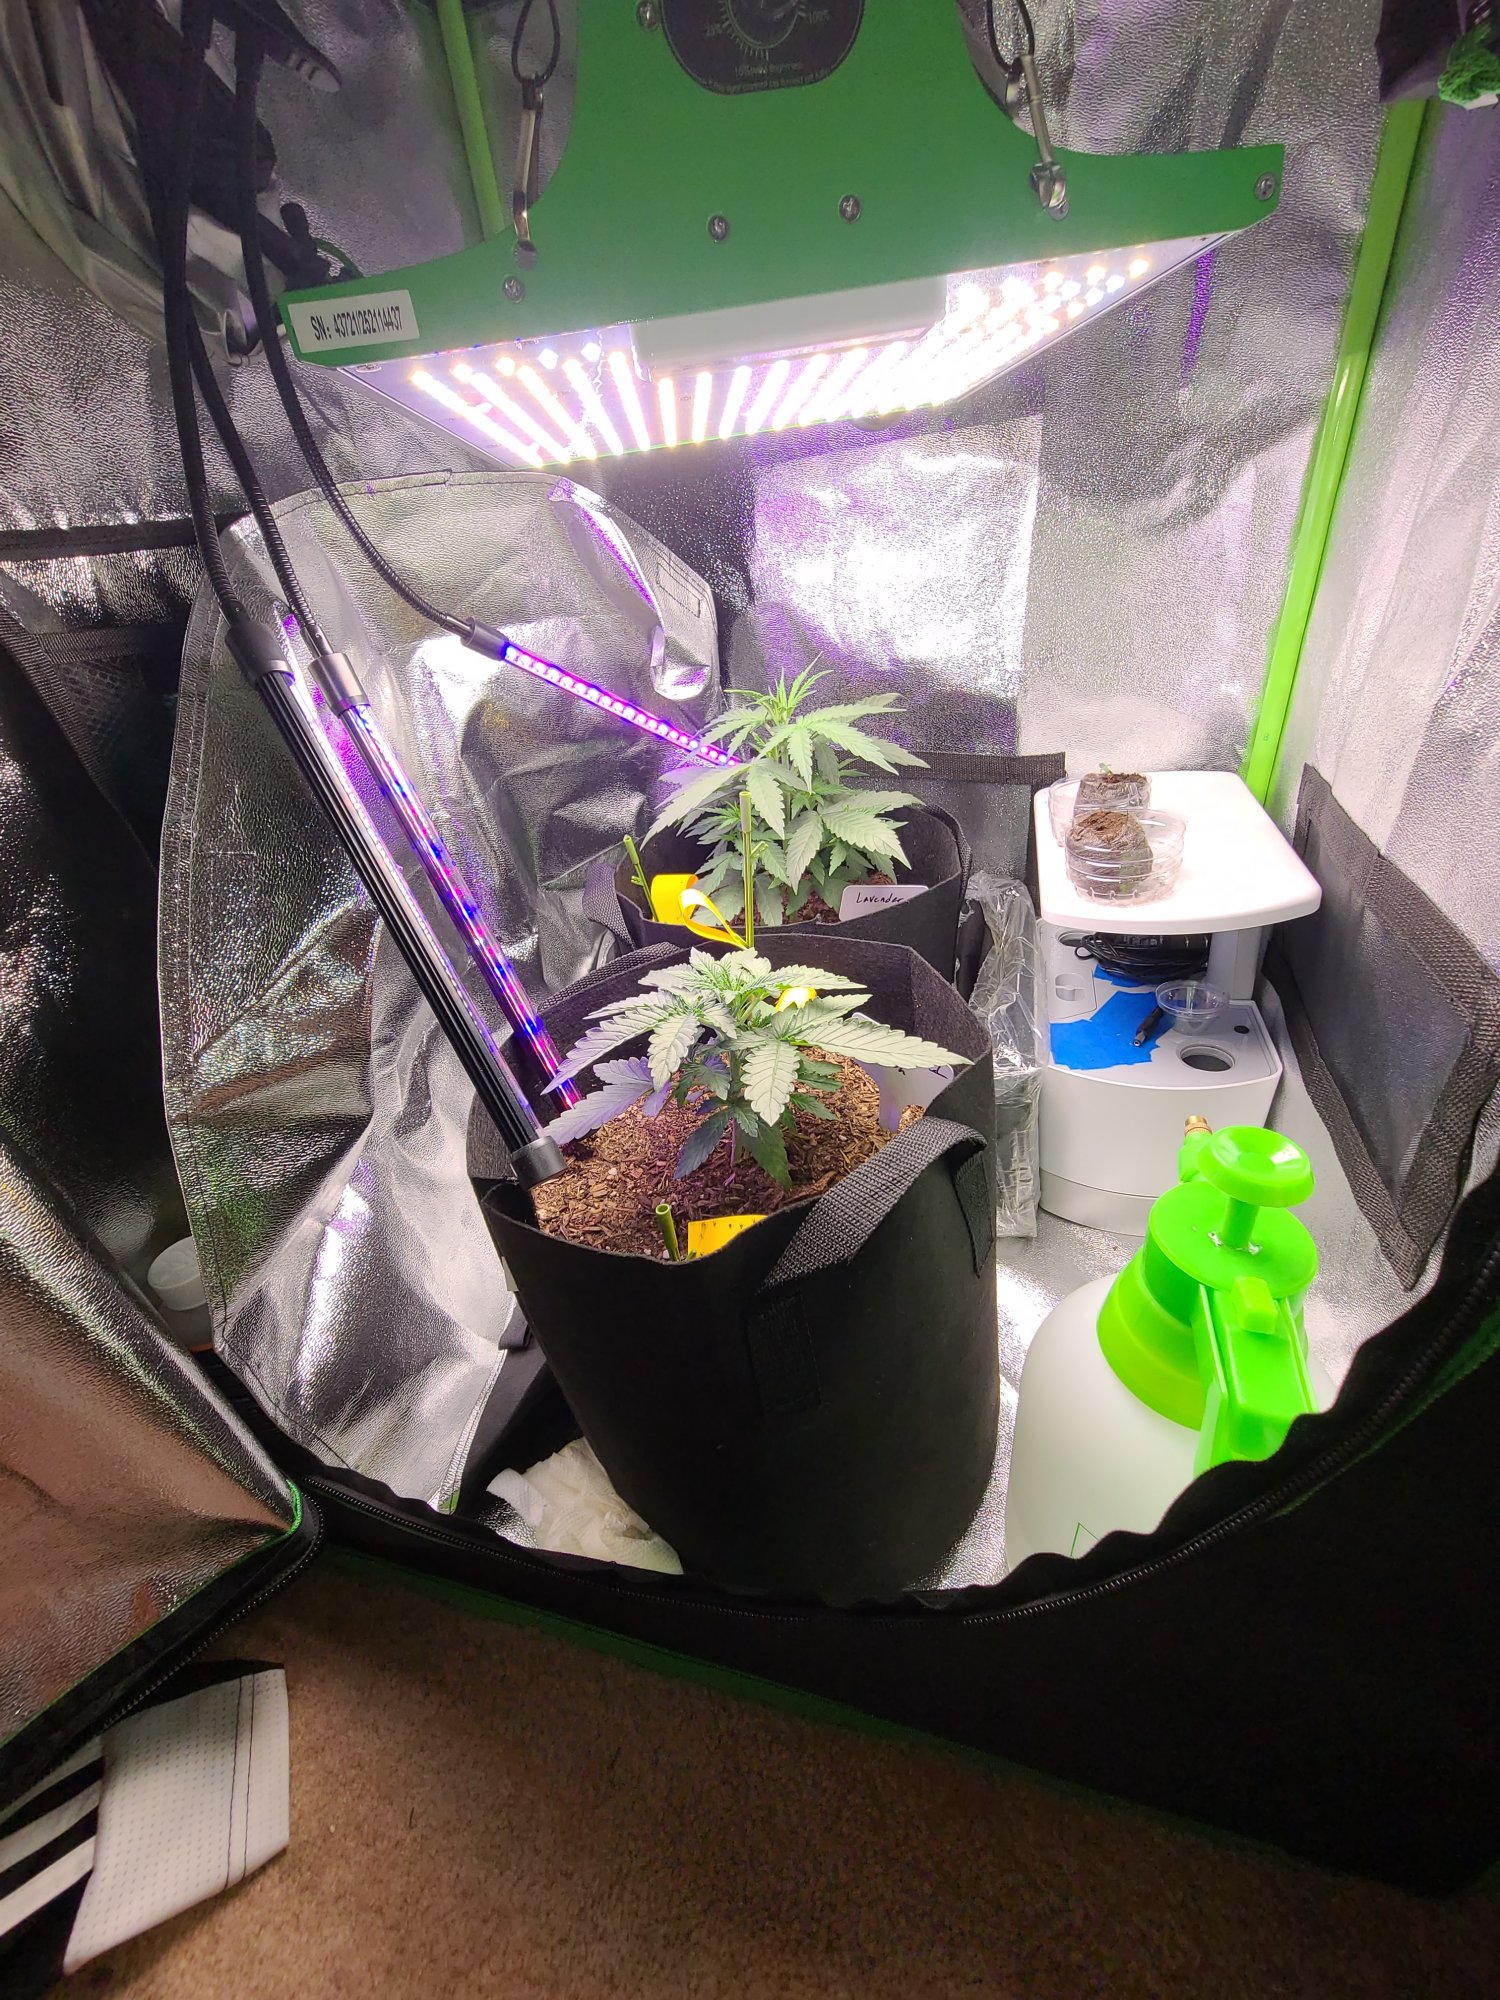 Total newbie at this grow